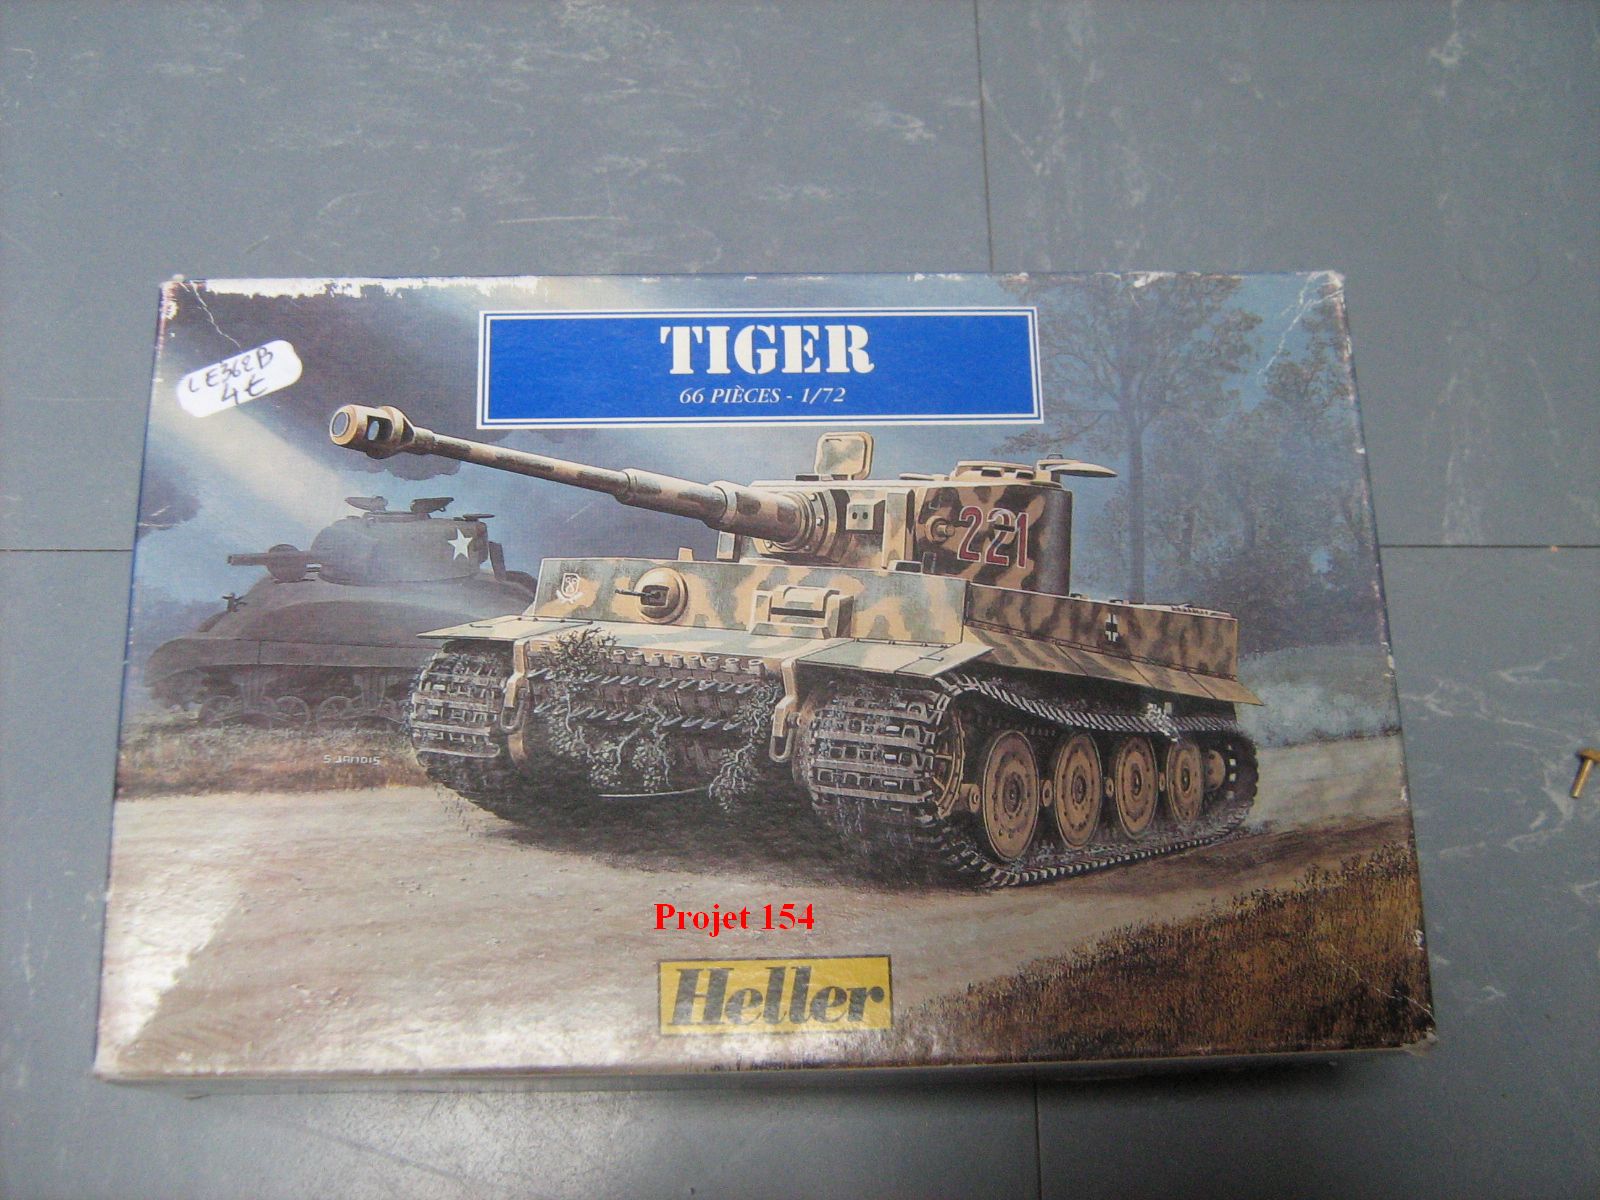 [Projet154]Tiger I Late Production - Camo hiver[1/72] 1110080405281175498866765